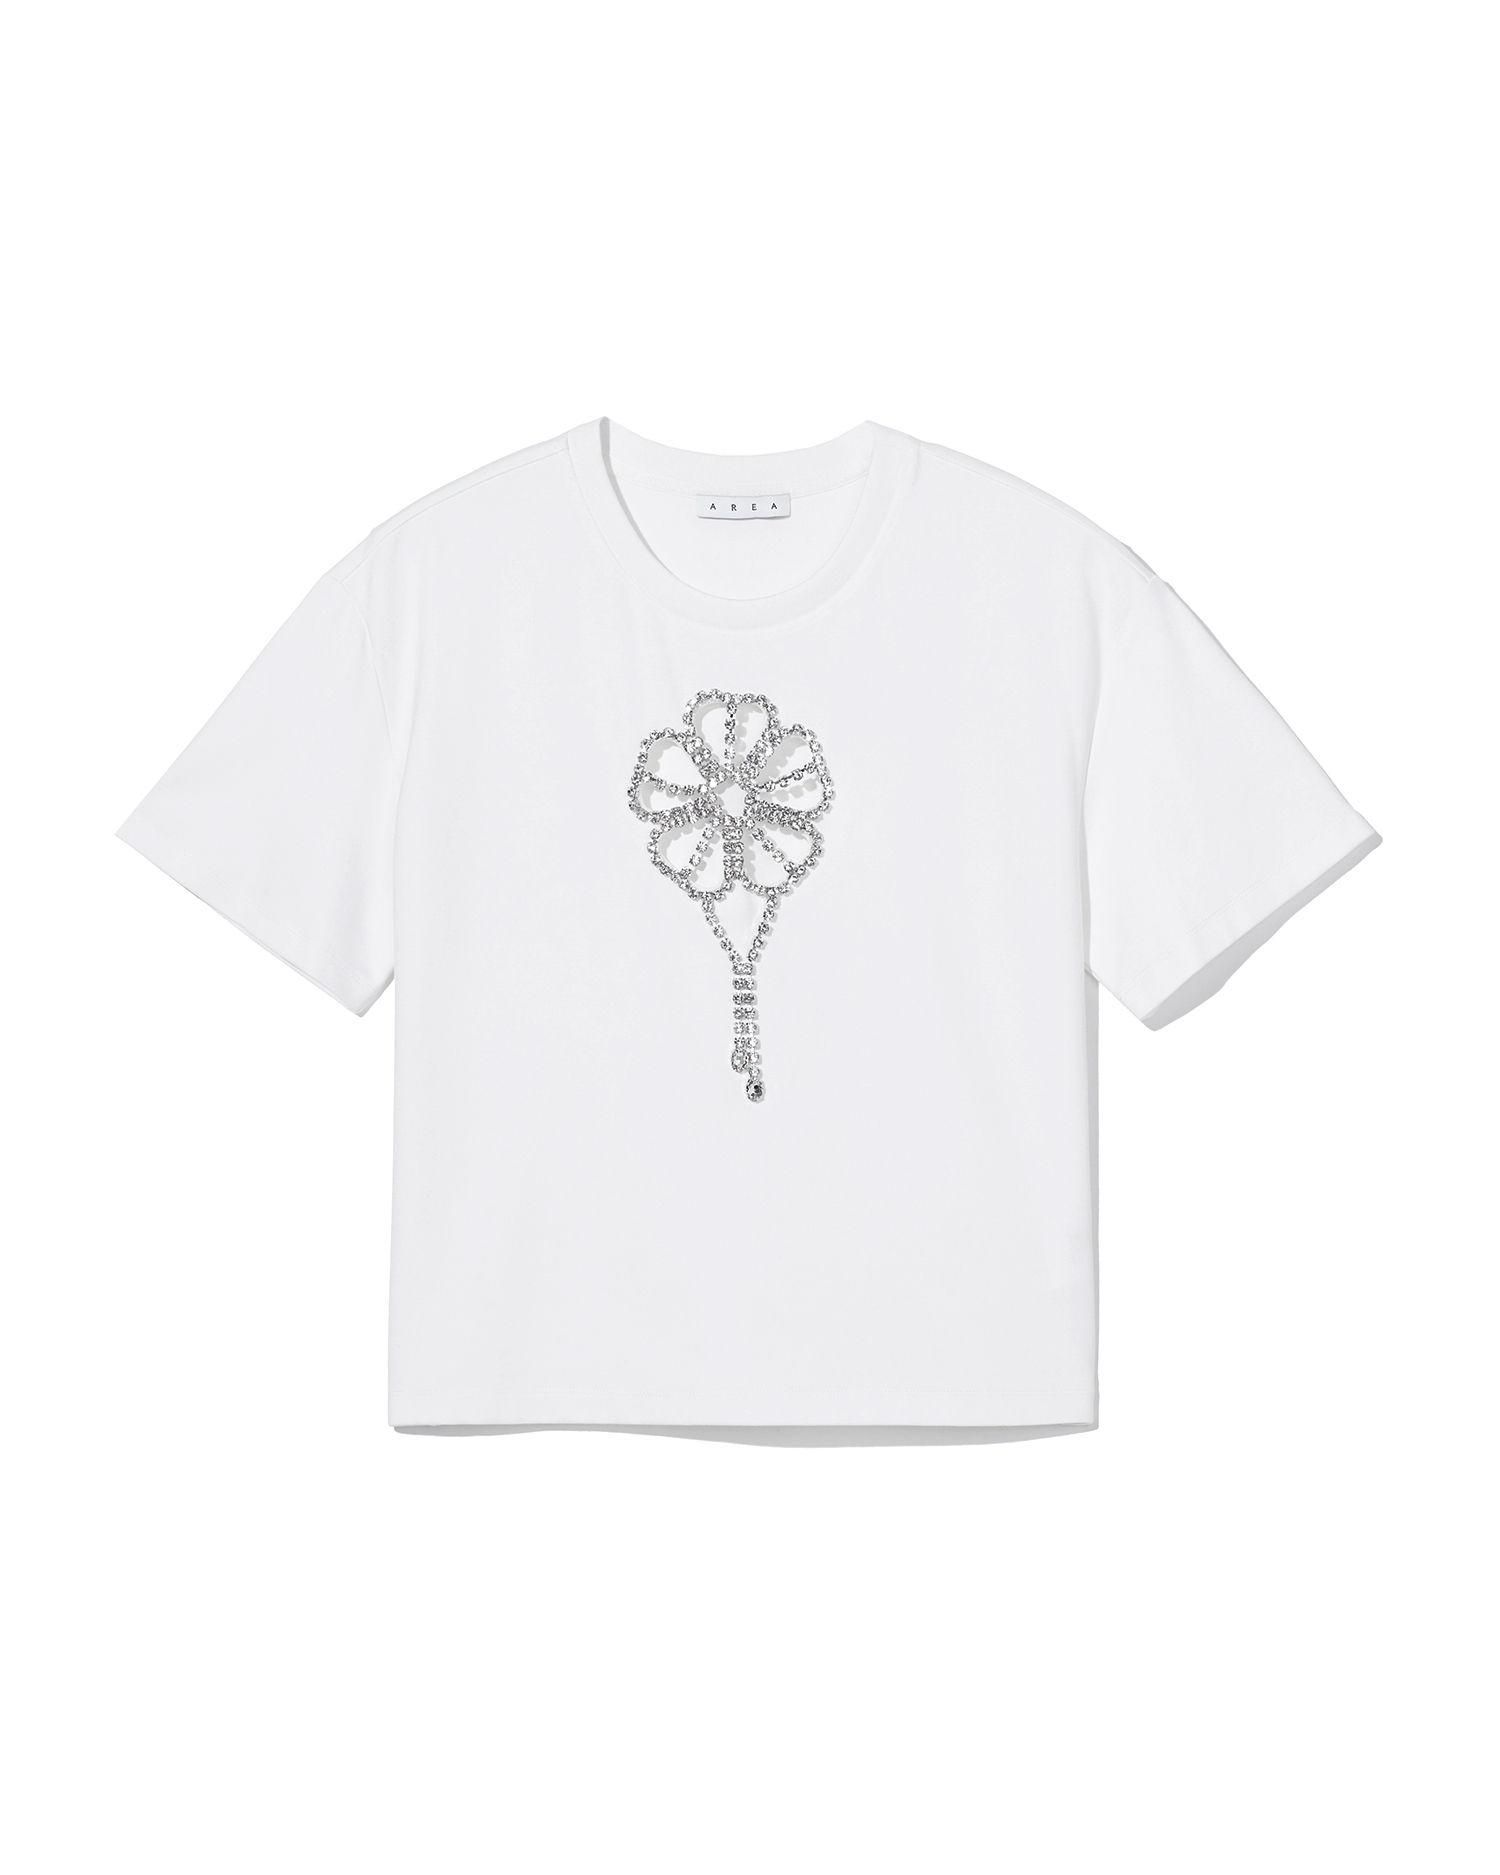 Crystal flower tee by AREA